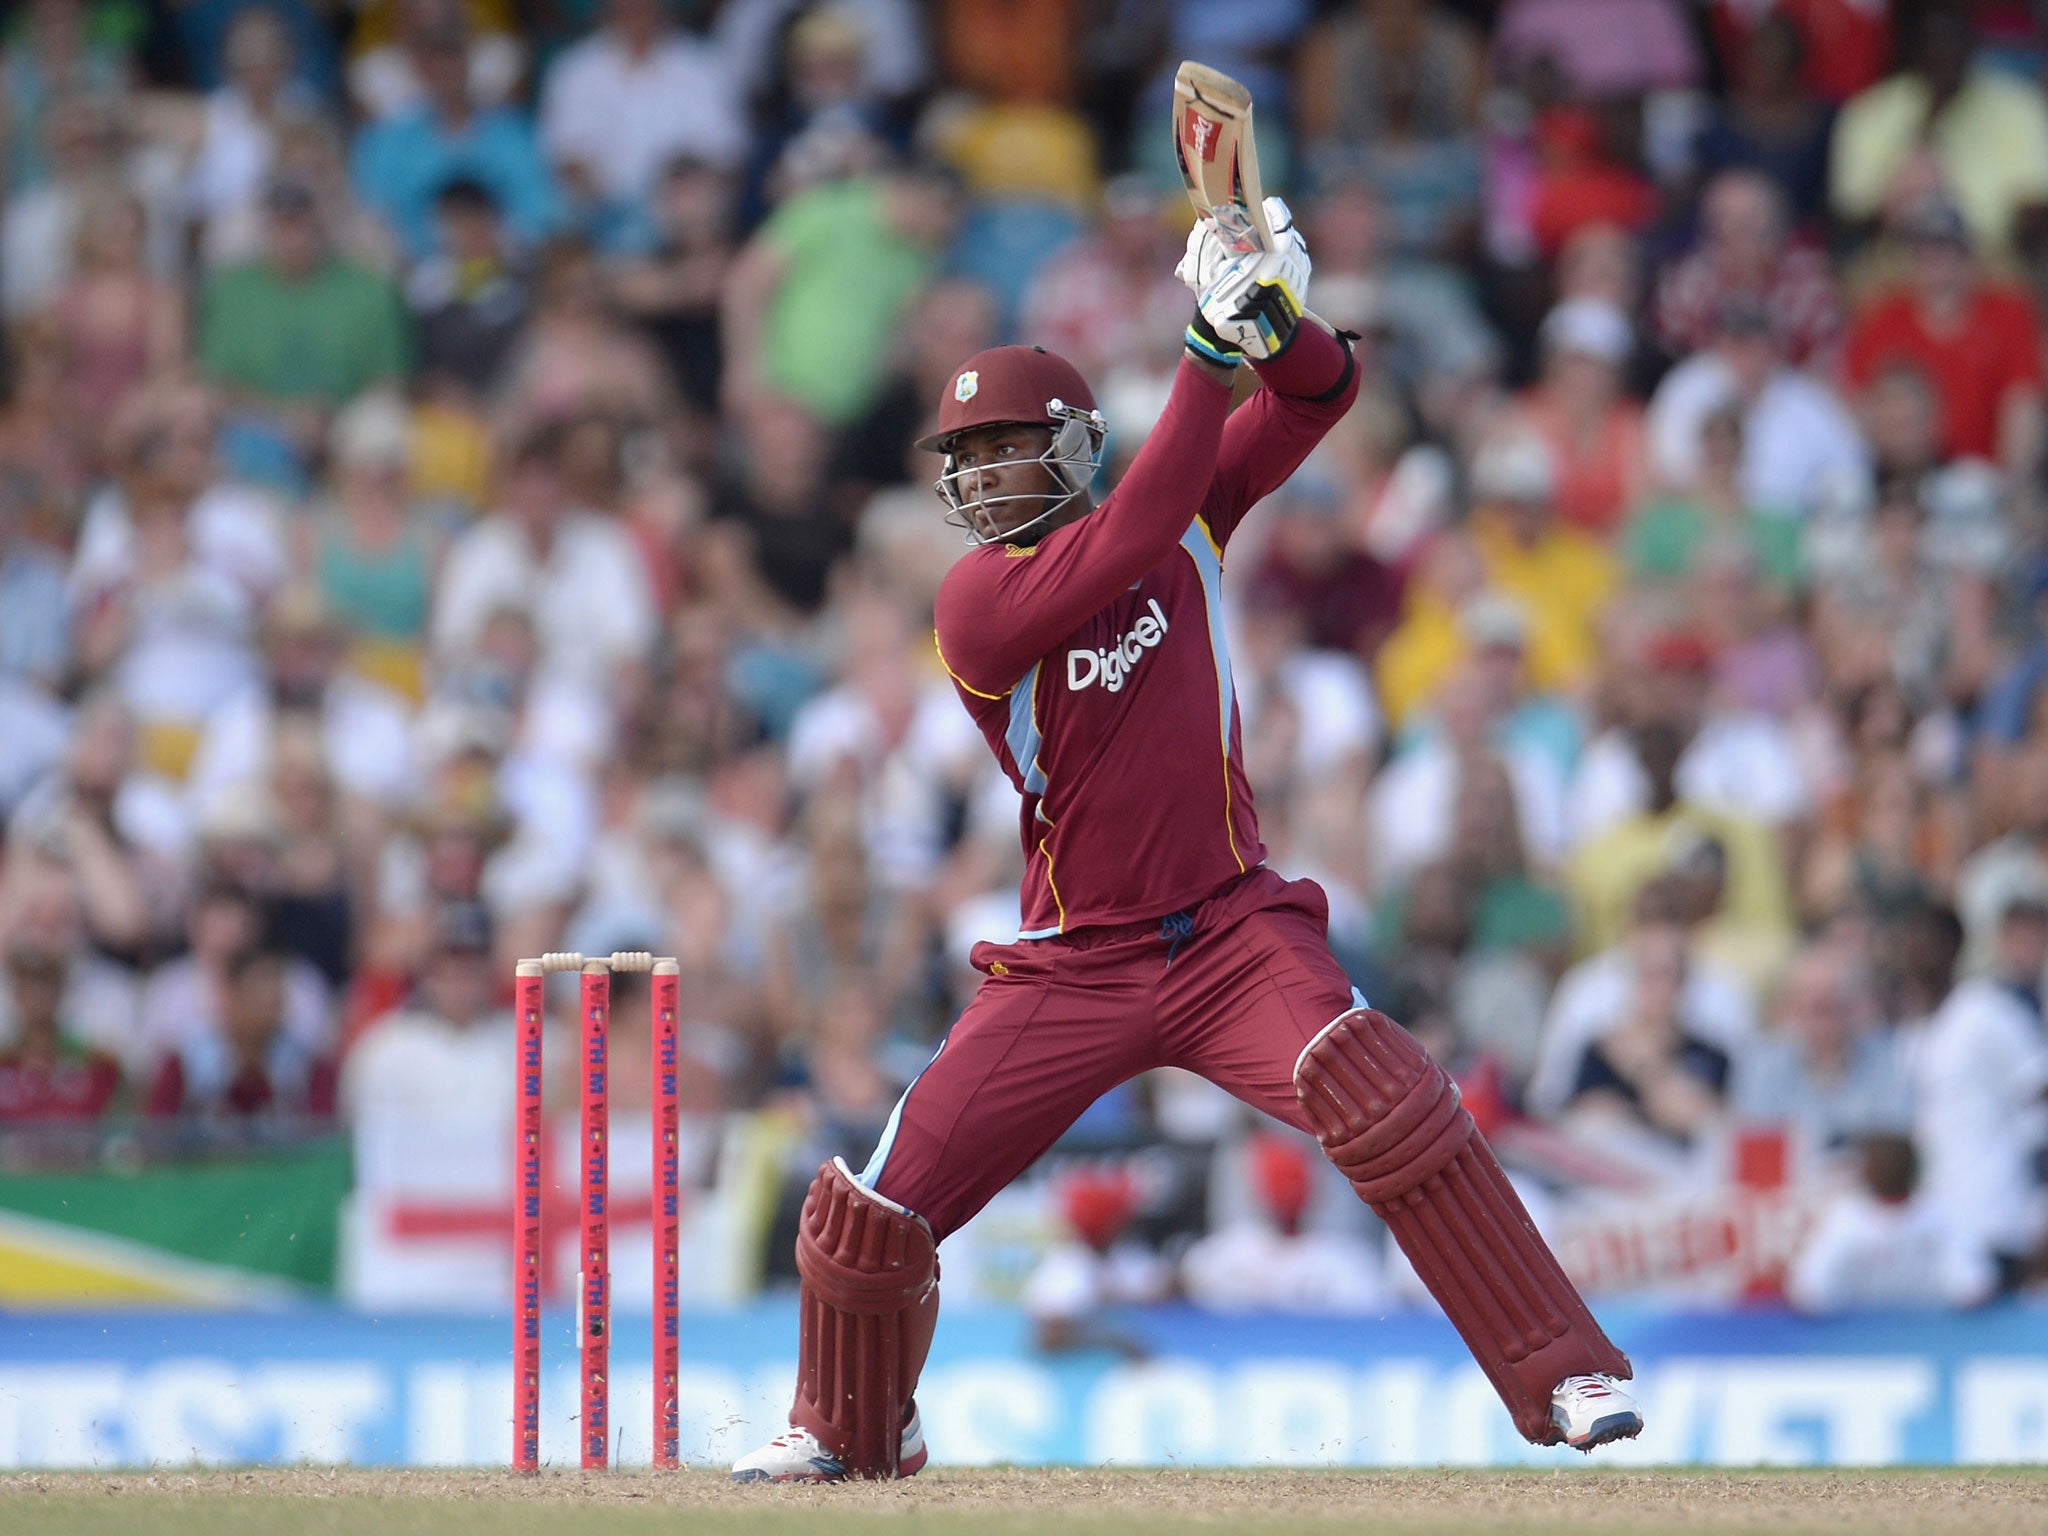 Marlon Samuels smashed 69 not out from 46 balls for West Indies